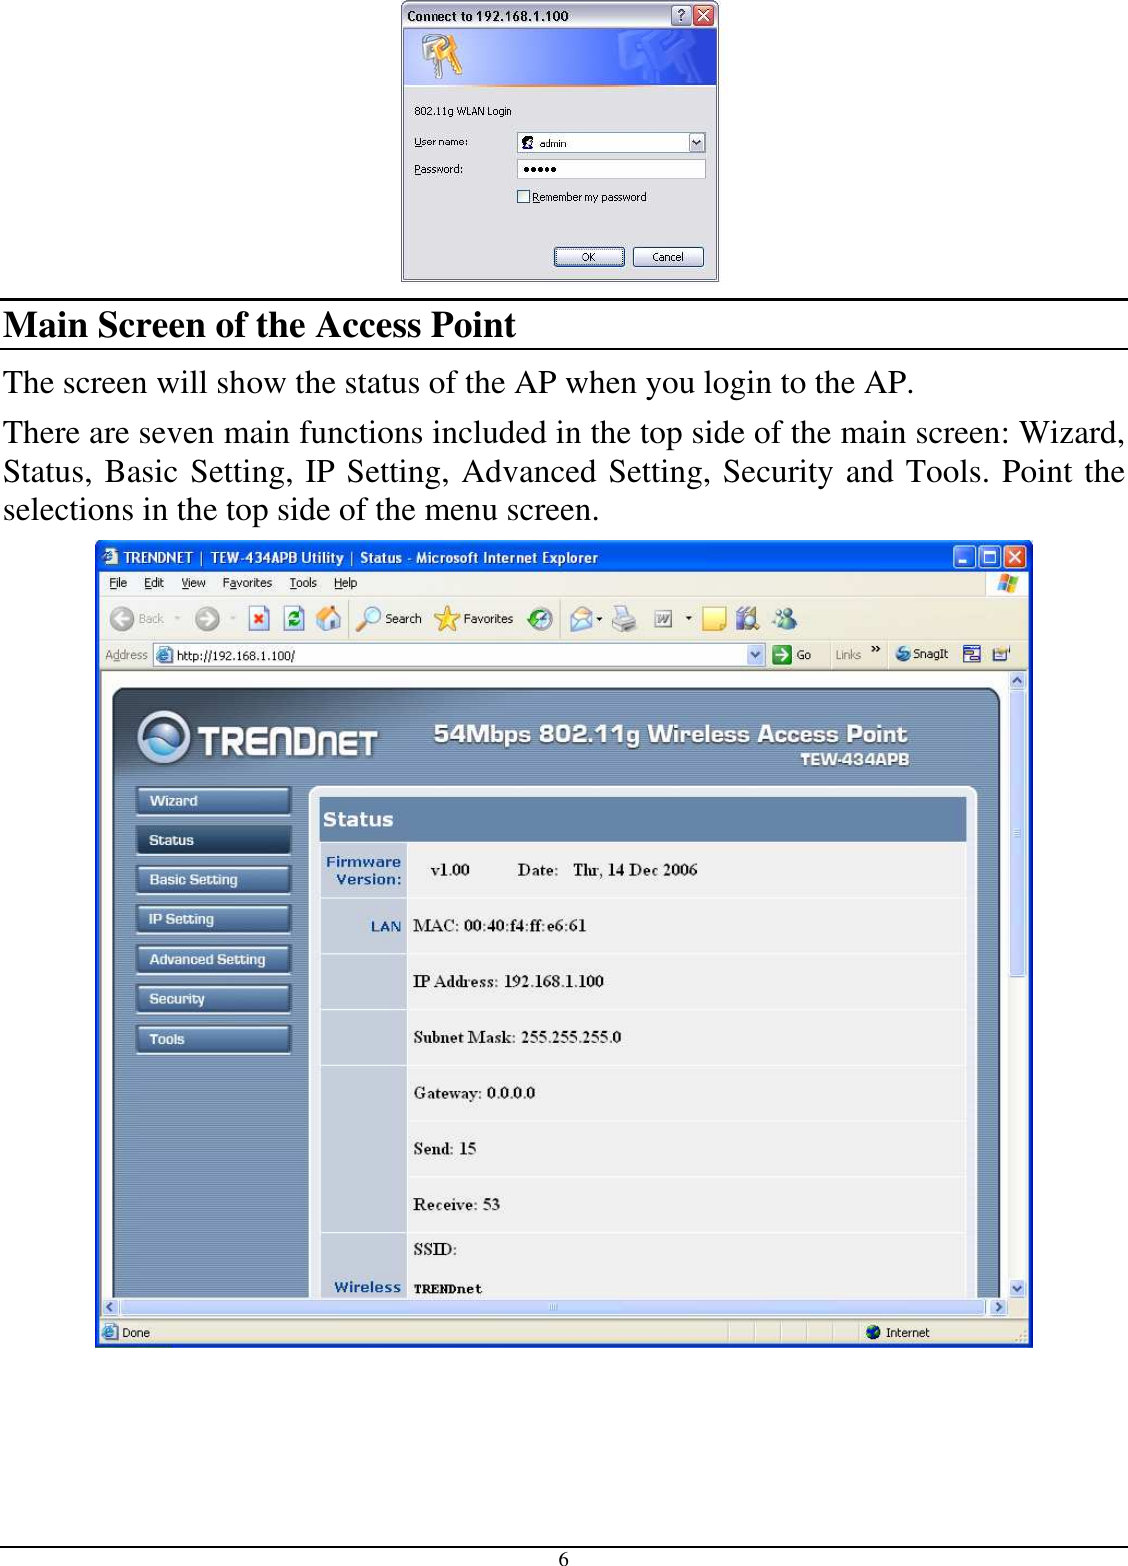  6  Main Screen of the Access Point The screen will show the status of the AP when you login to the AP. There are seven main functions included in the top side of the main screen: Wizard, Status, Basic Setting, IP Setting, Advanced Setting, Security and Tools. Point the selections in the top side of the menu screen.  